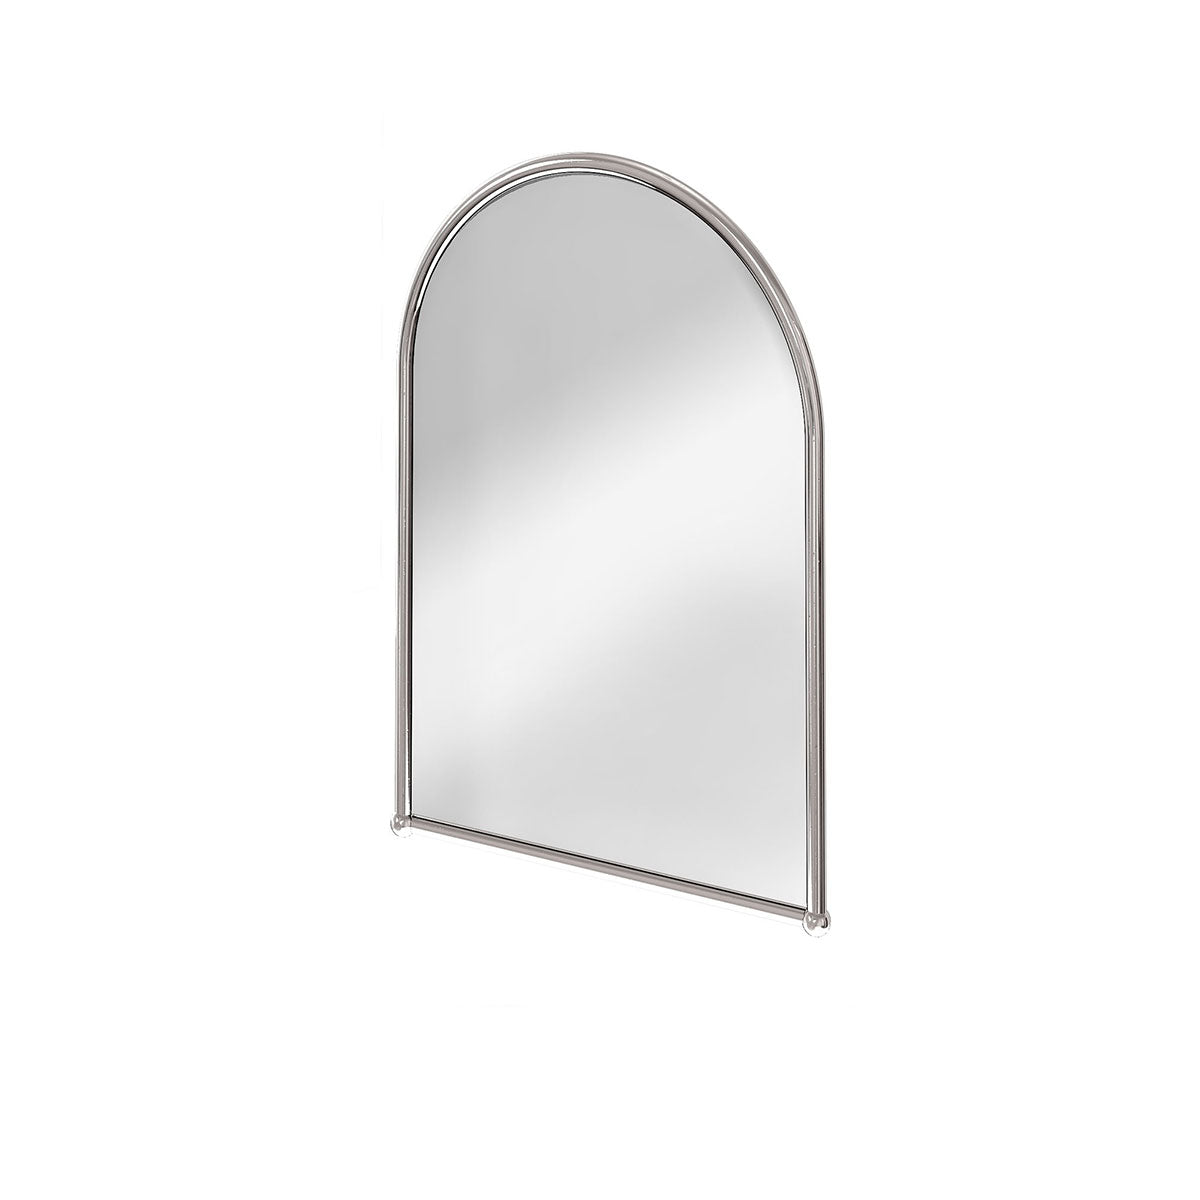 Arched Mirror Feature Feature Chrome Deluxe Bathrooms UK